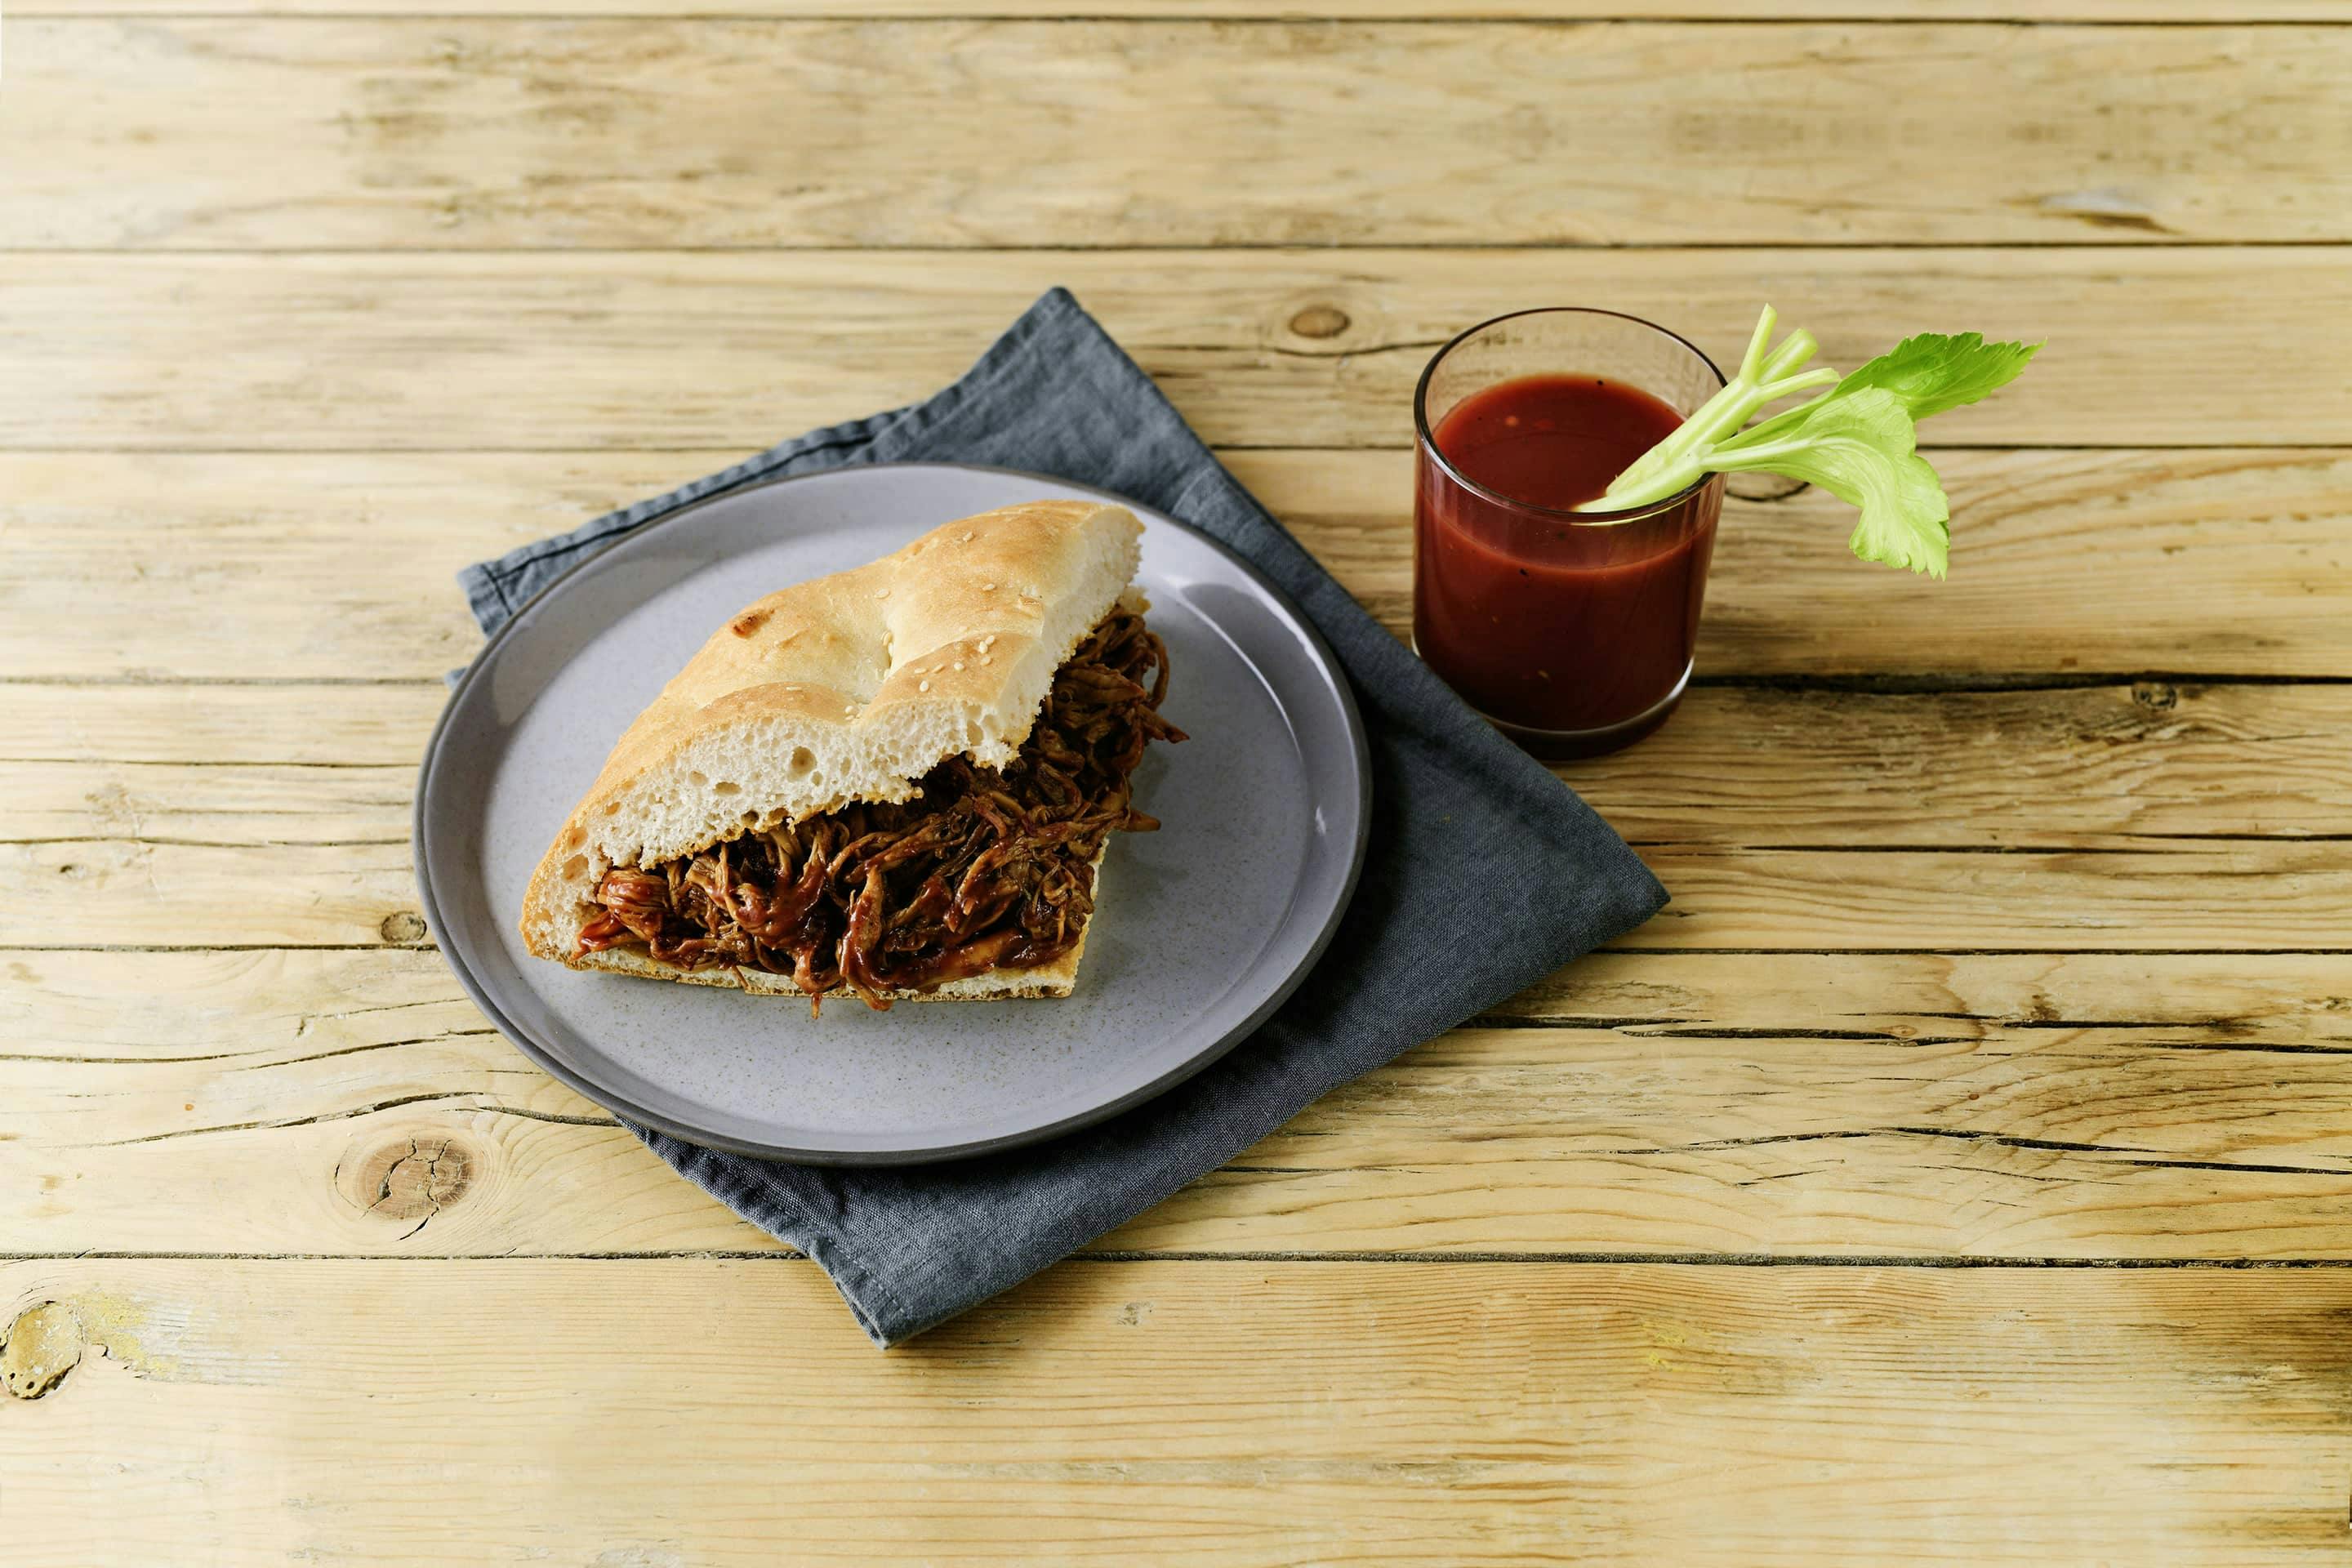 Grill-Smoked Pulled Pork im Fladenbrot mit Bloody mary